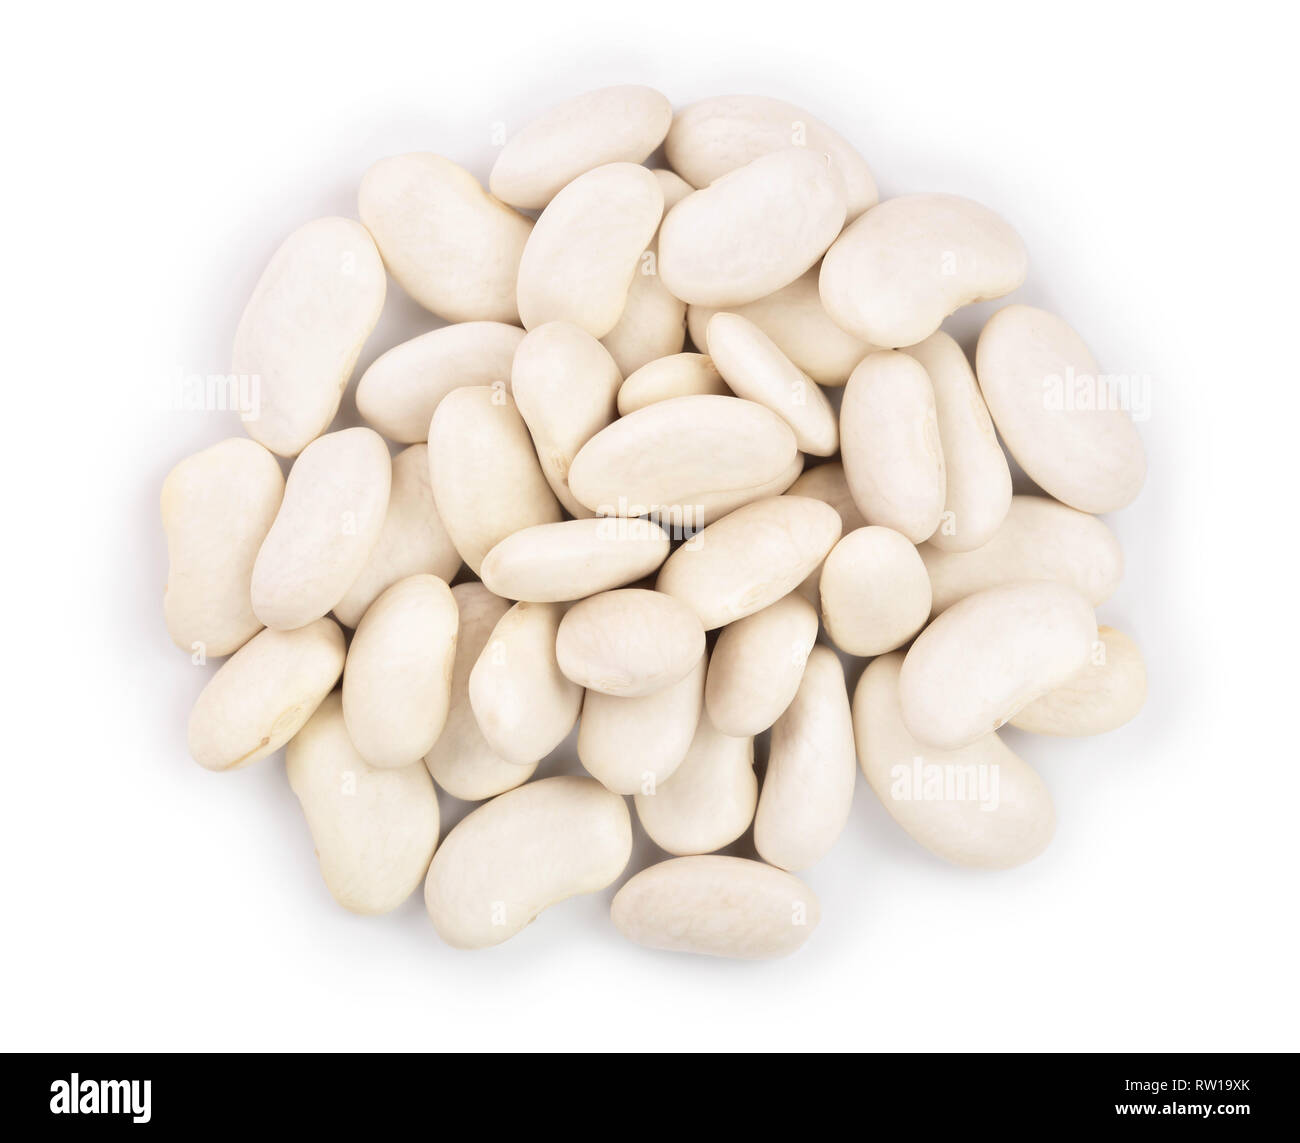 white kidney bean isolated on white background. Top view. Flat lay Stock Photo